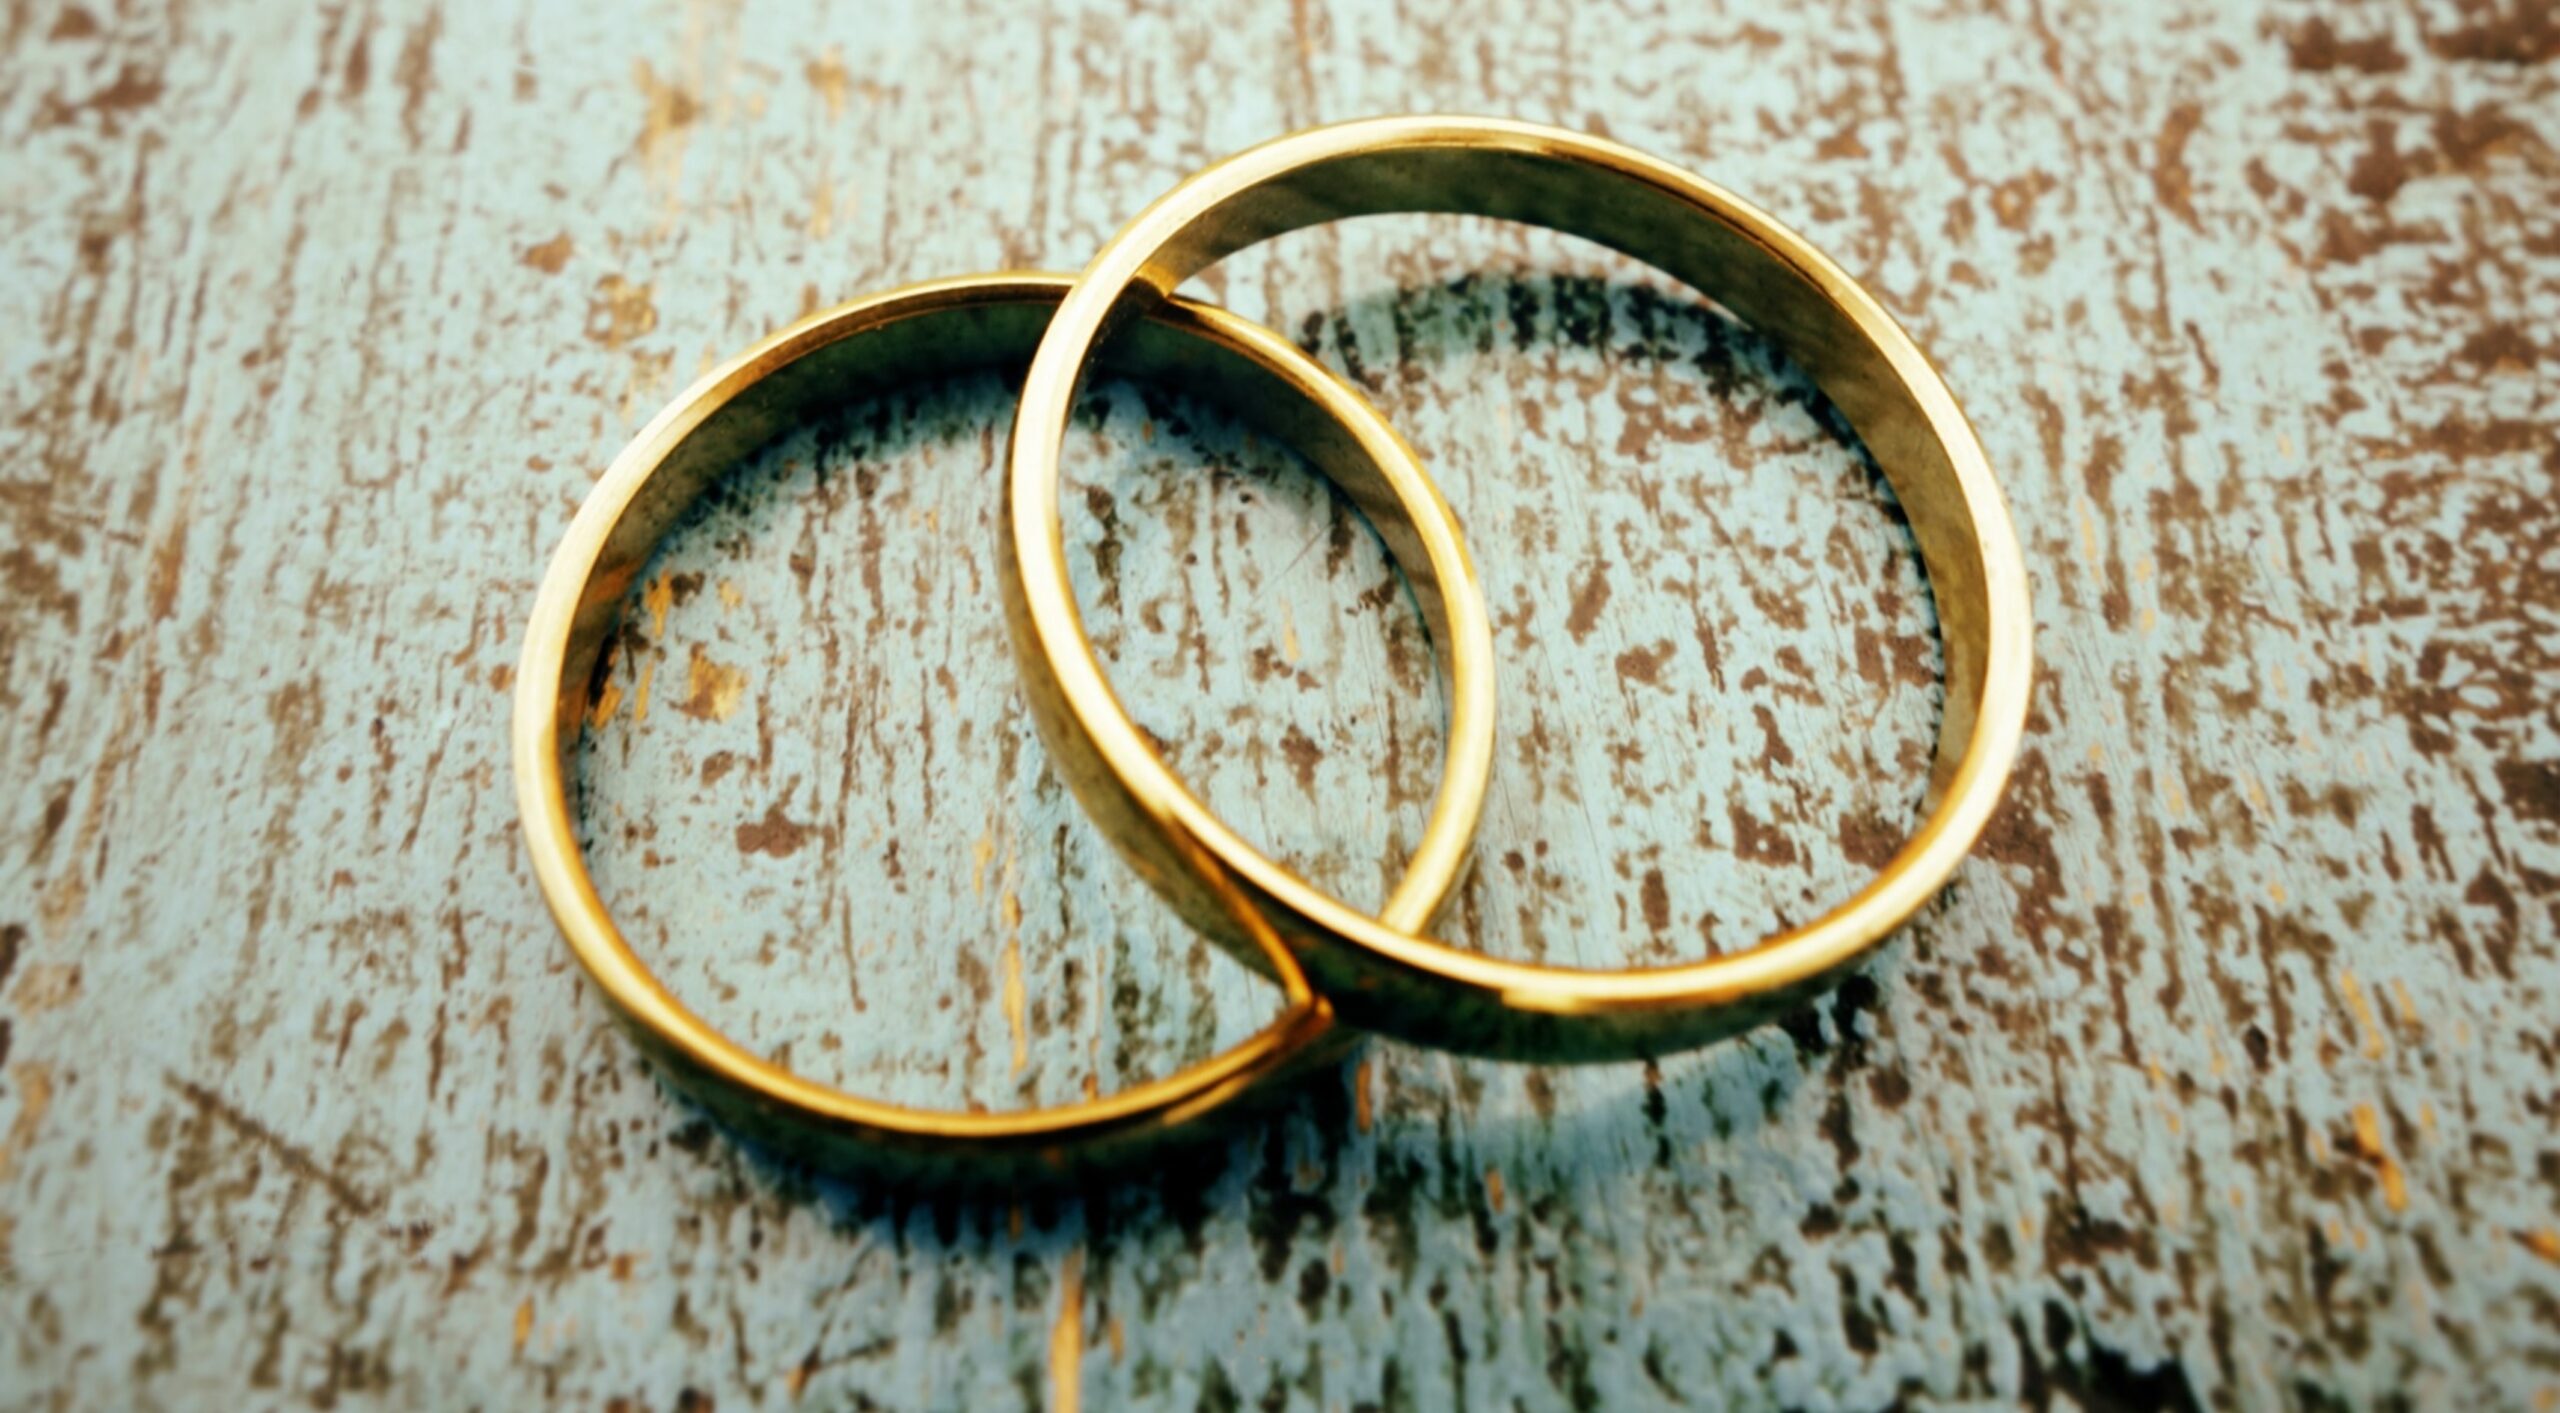 A pair of gold rings on a stone surface